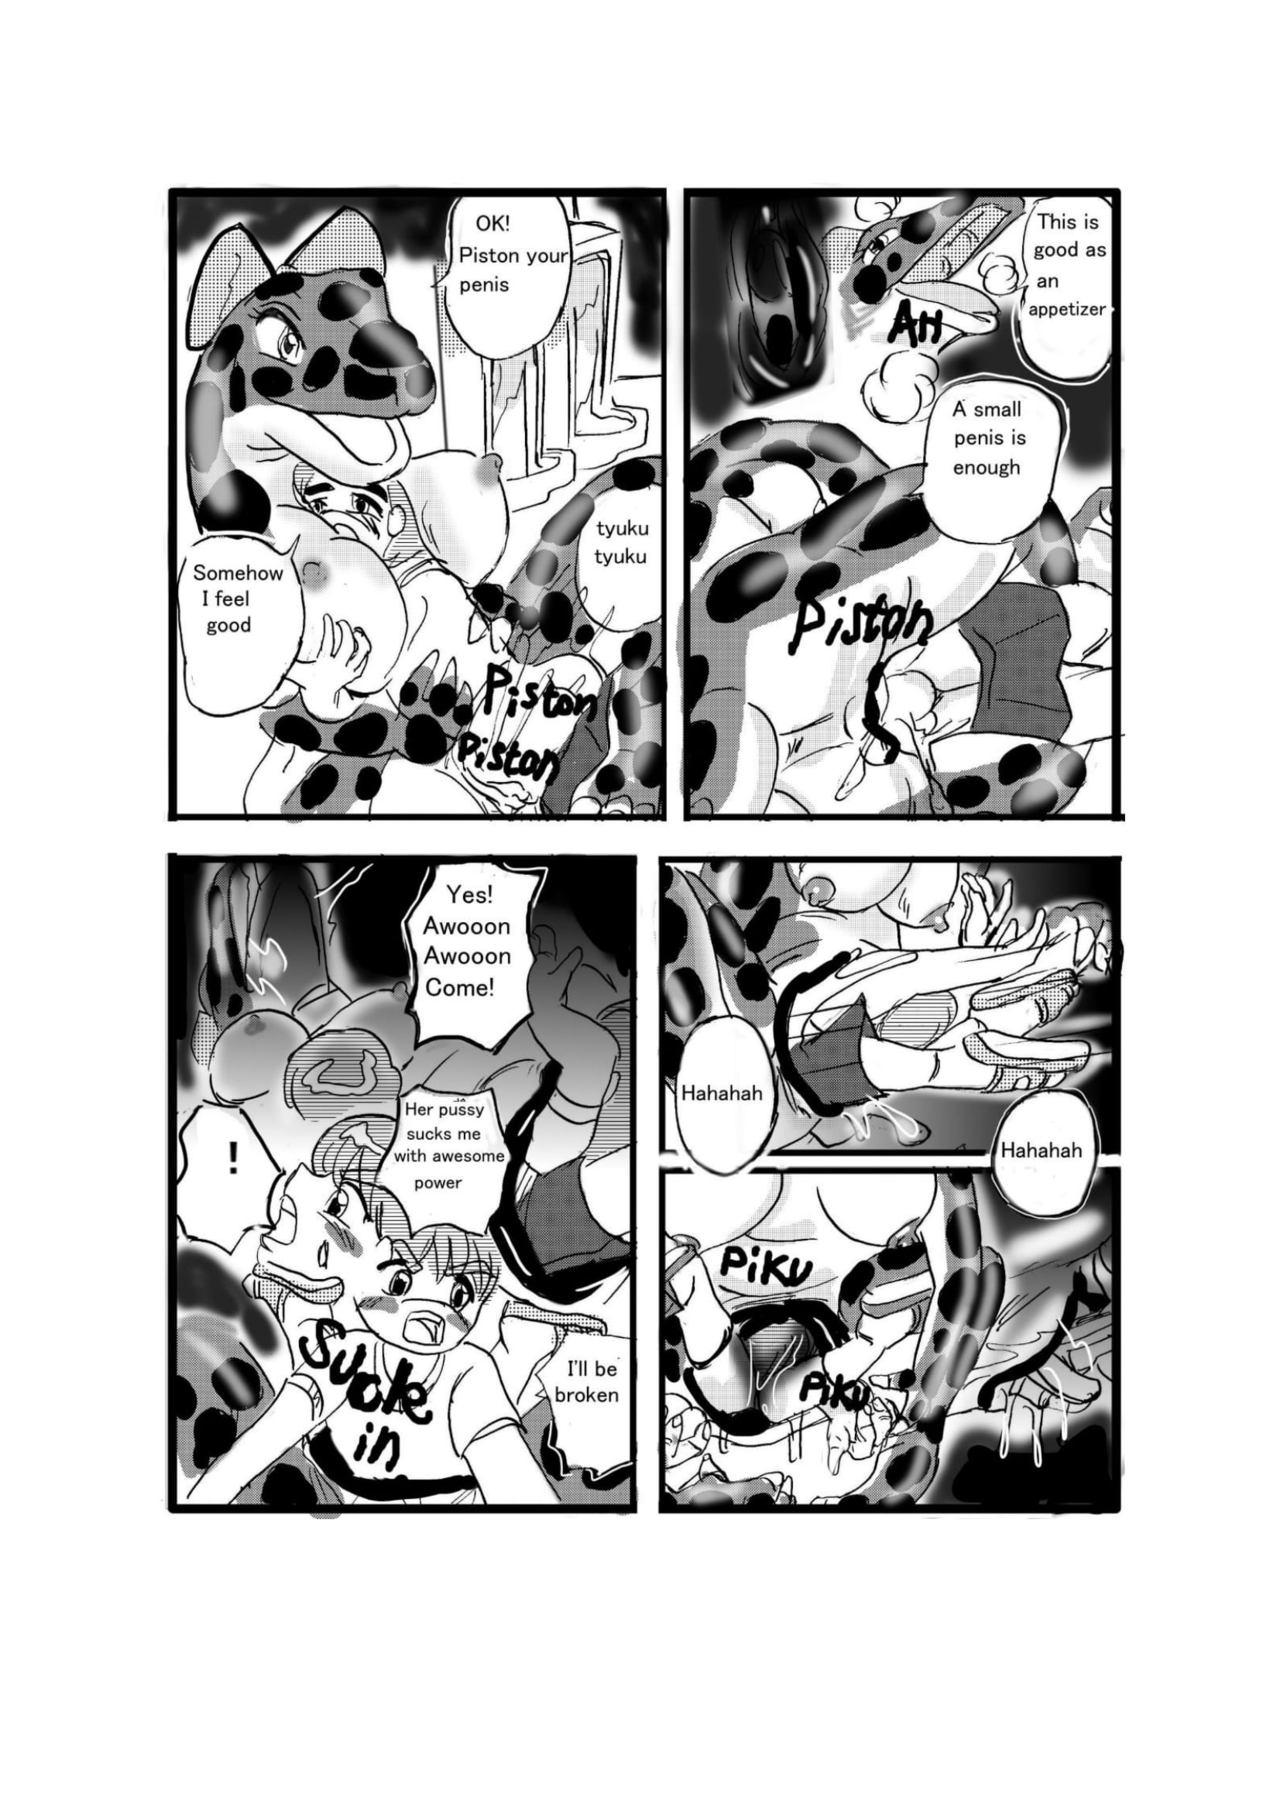 Chubby Swallowed Whole vol.2 Waniko + What's Digestion? - Original Gay Shop - Page 5